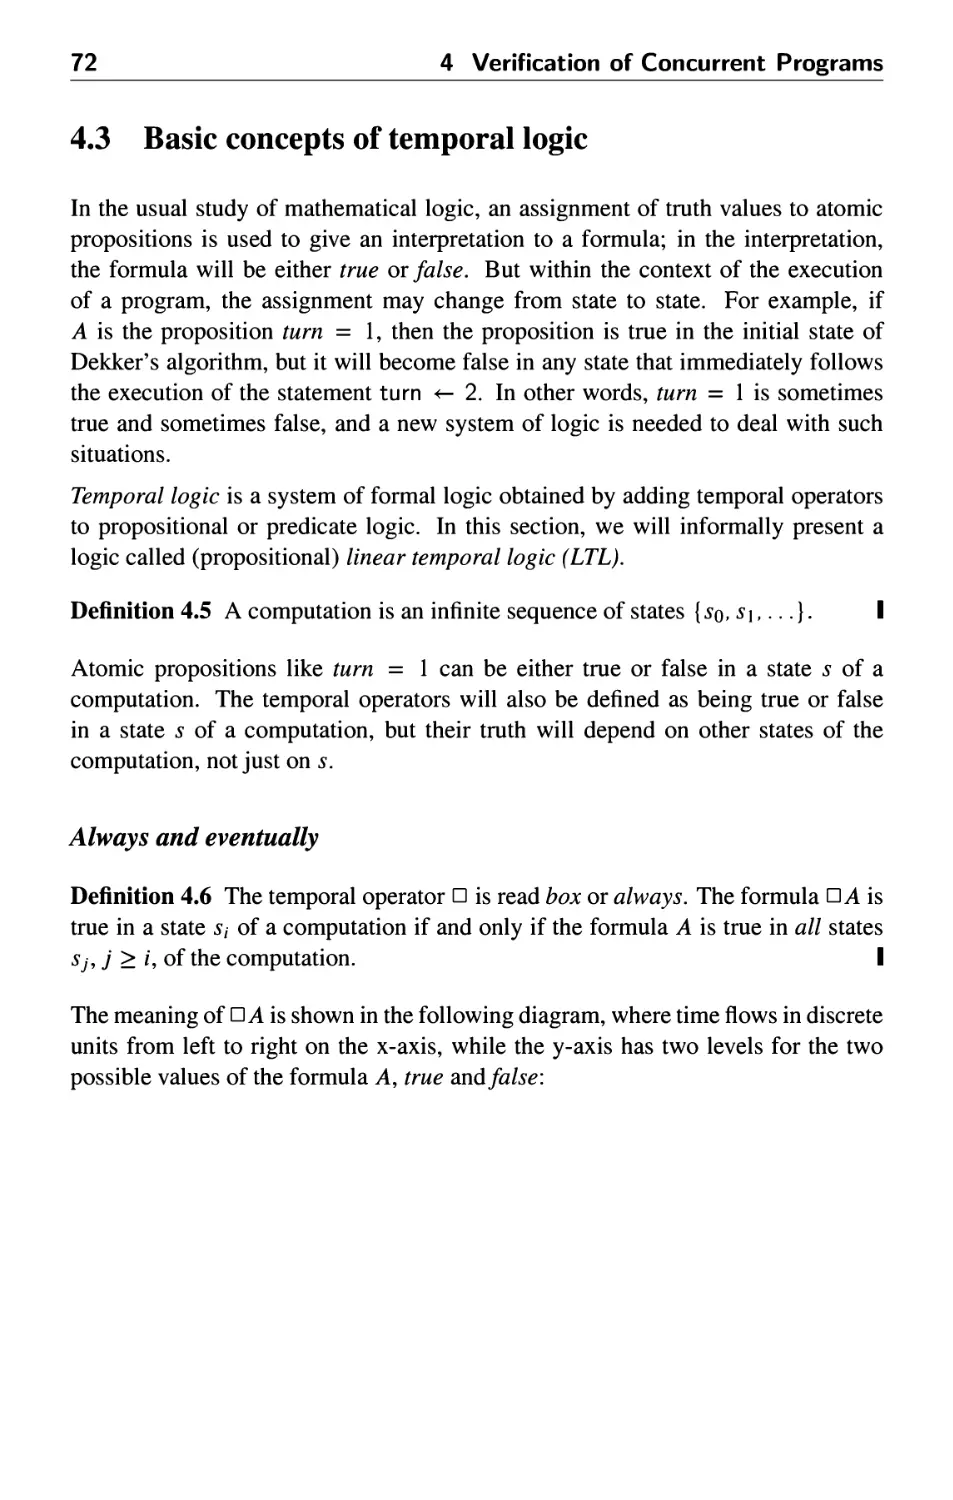 4.3 Basic concepts of temporal logic